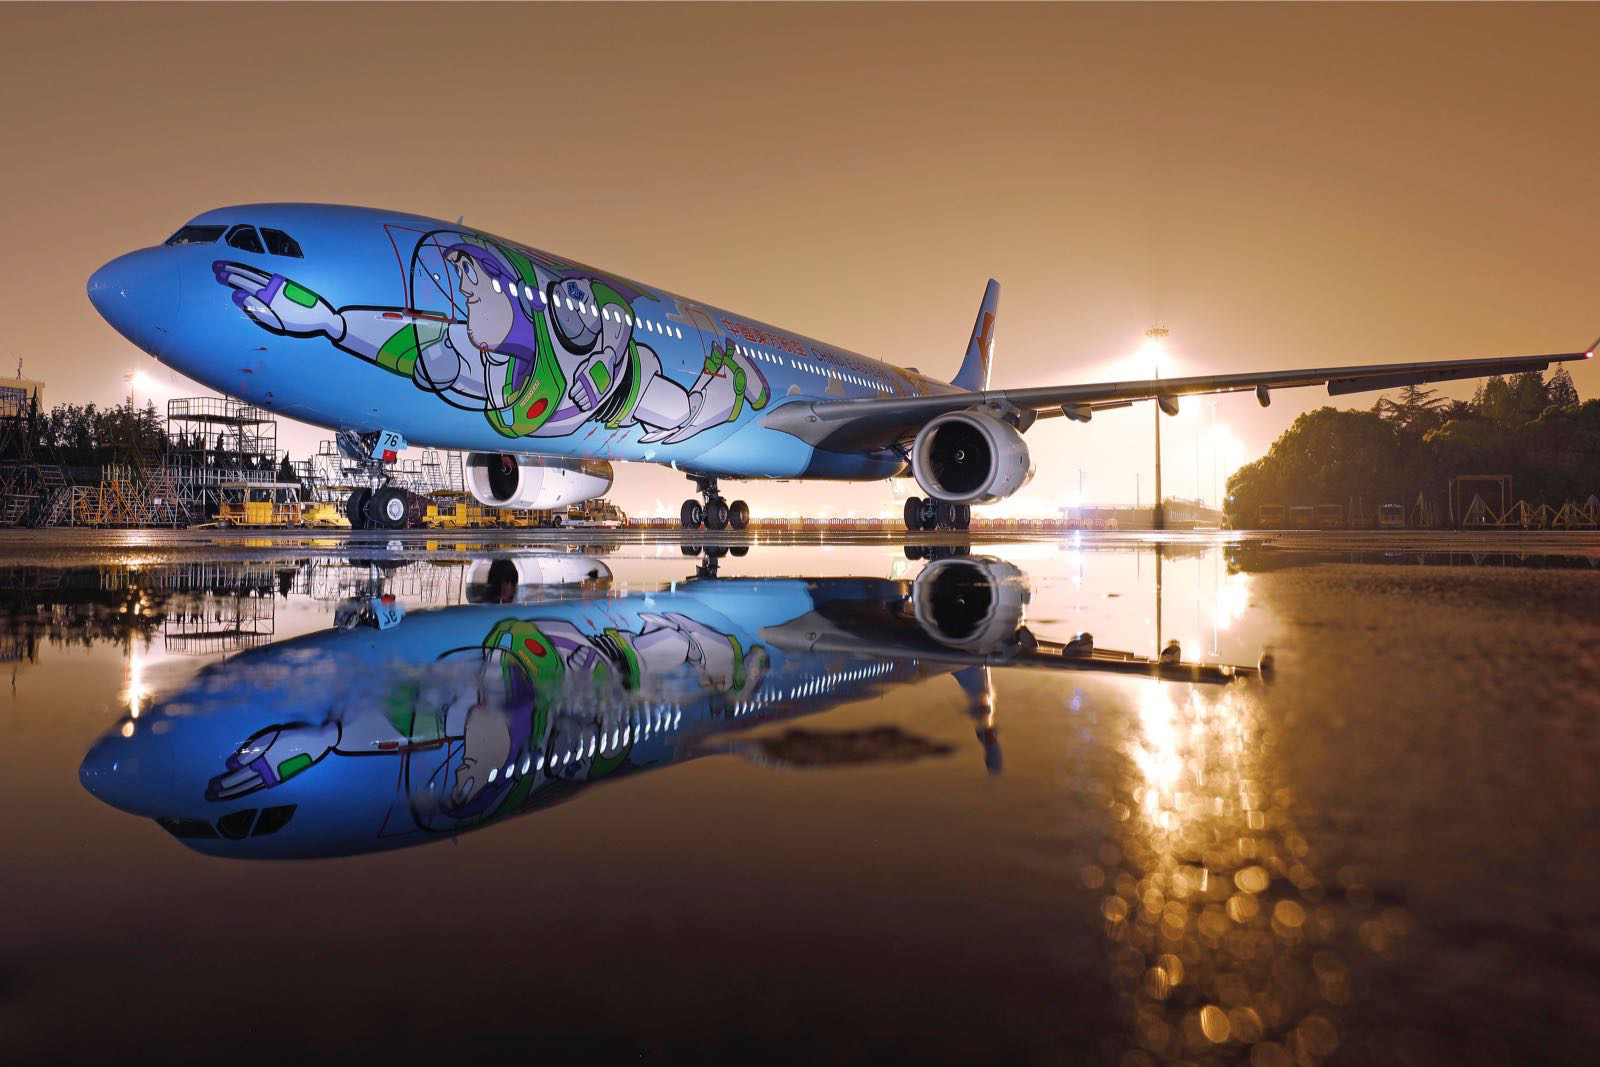 PHOTO: A Toy Story themed plane is taking off in China. The plane is a collaboration between Disney-Pixar and China Eastern Airlines. It has Buzz and Woody painted on the exterior and it  has familiar movie characters in the interior.